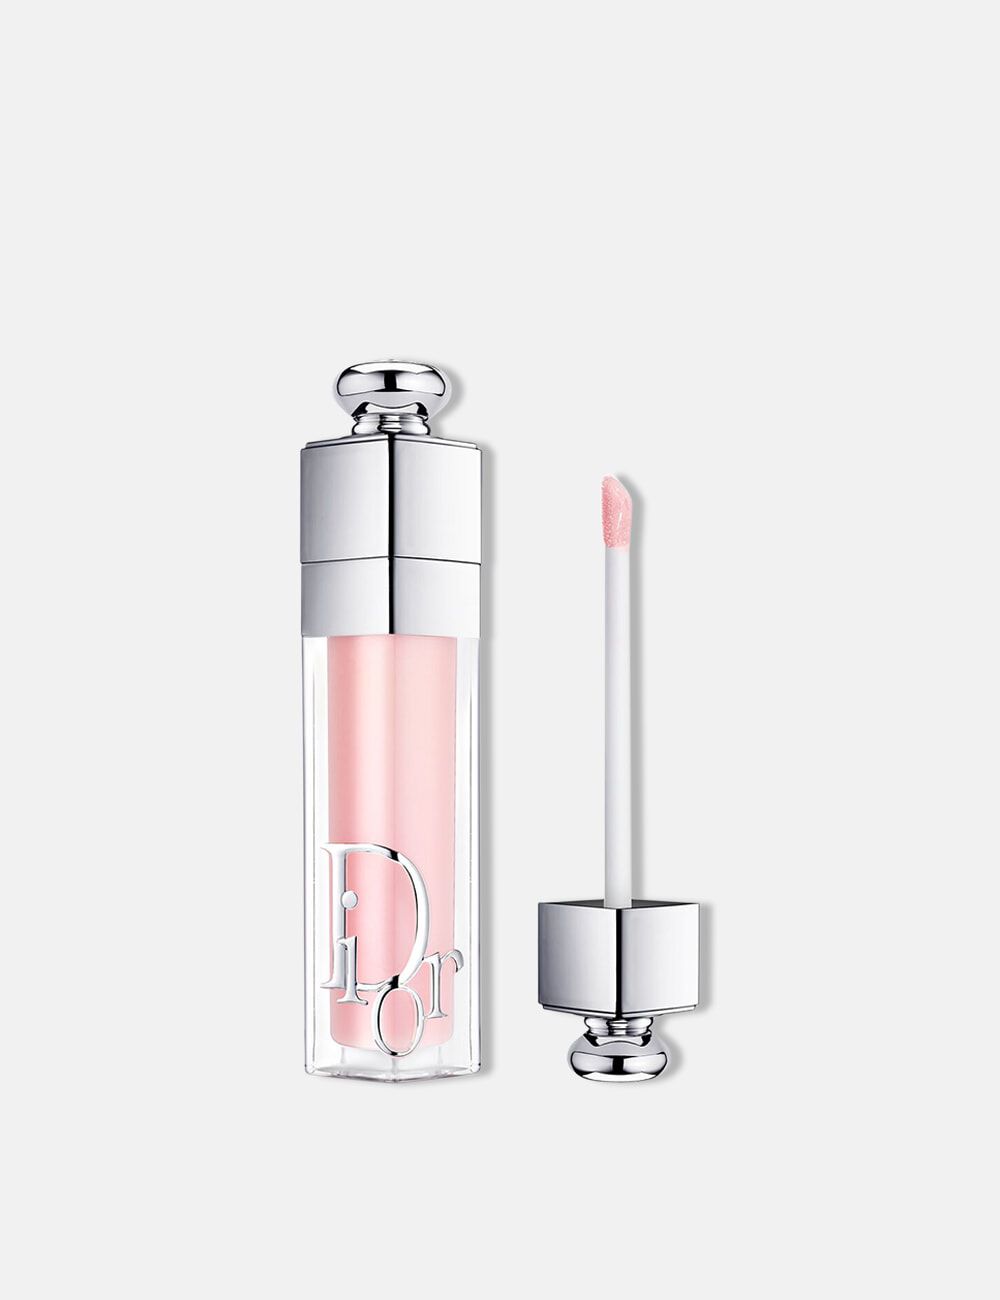 Dior launches online beauty store for UAE market  Global Cosmetics News